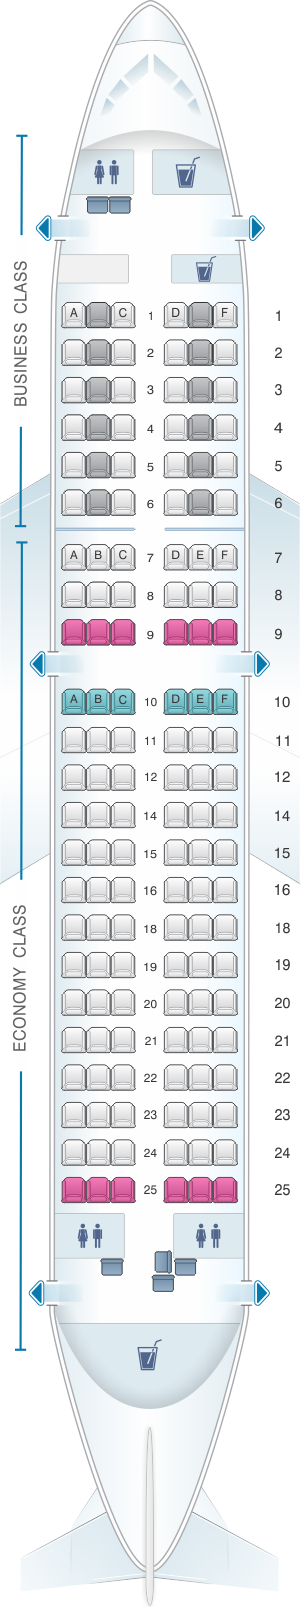 Seat map for Lufthansa Airbus A319